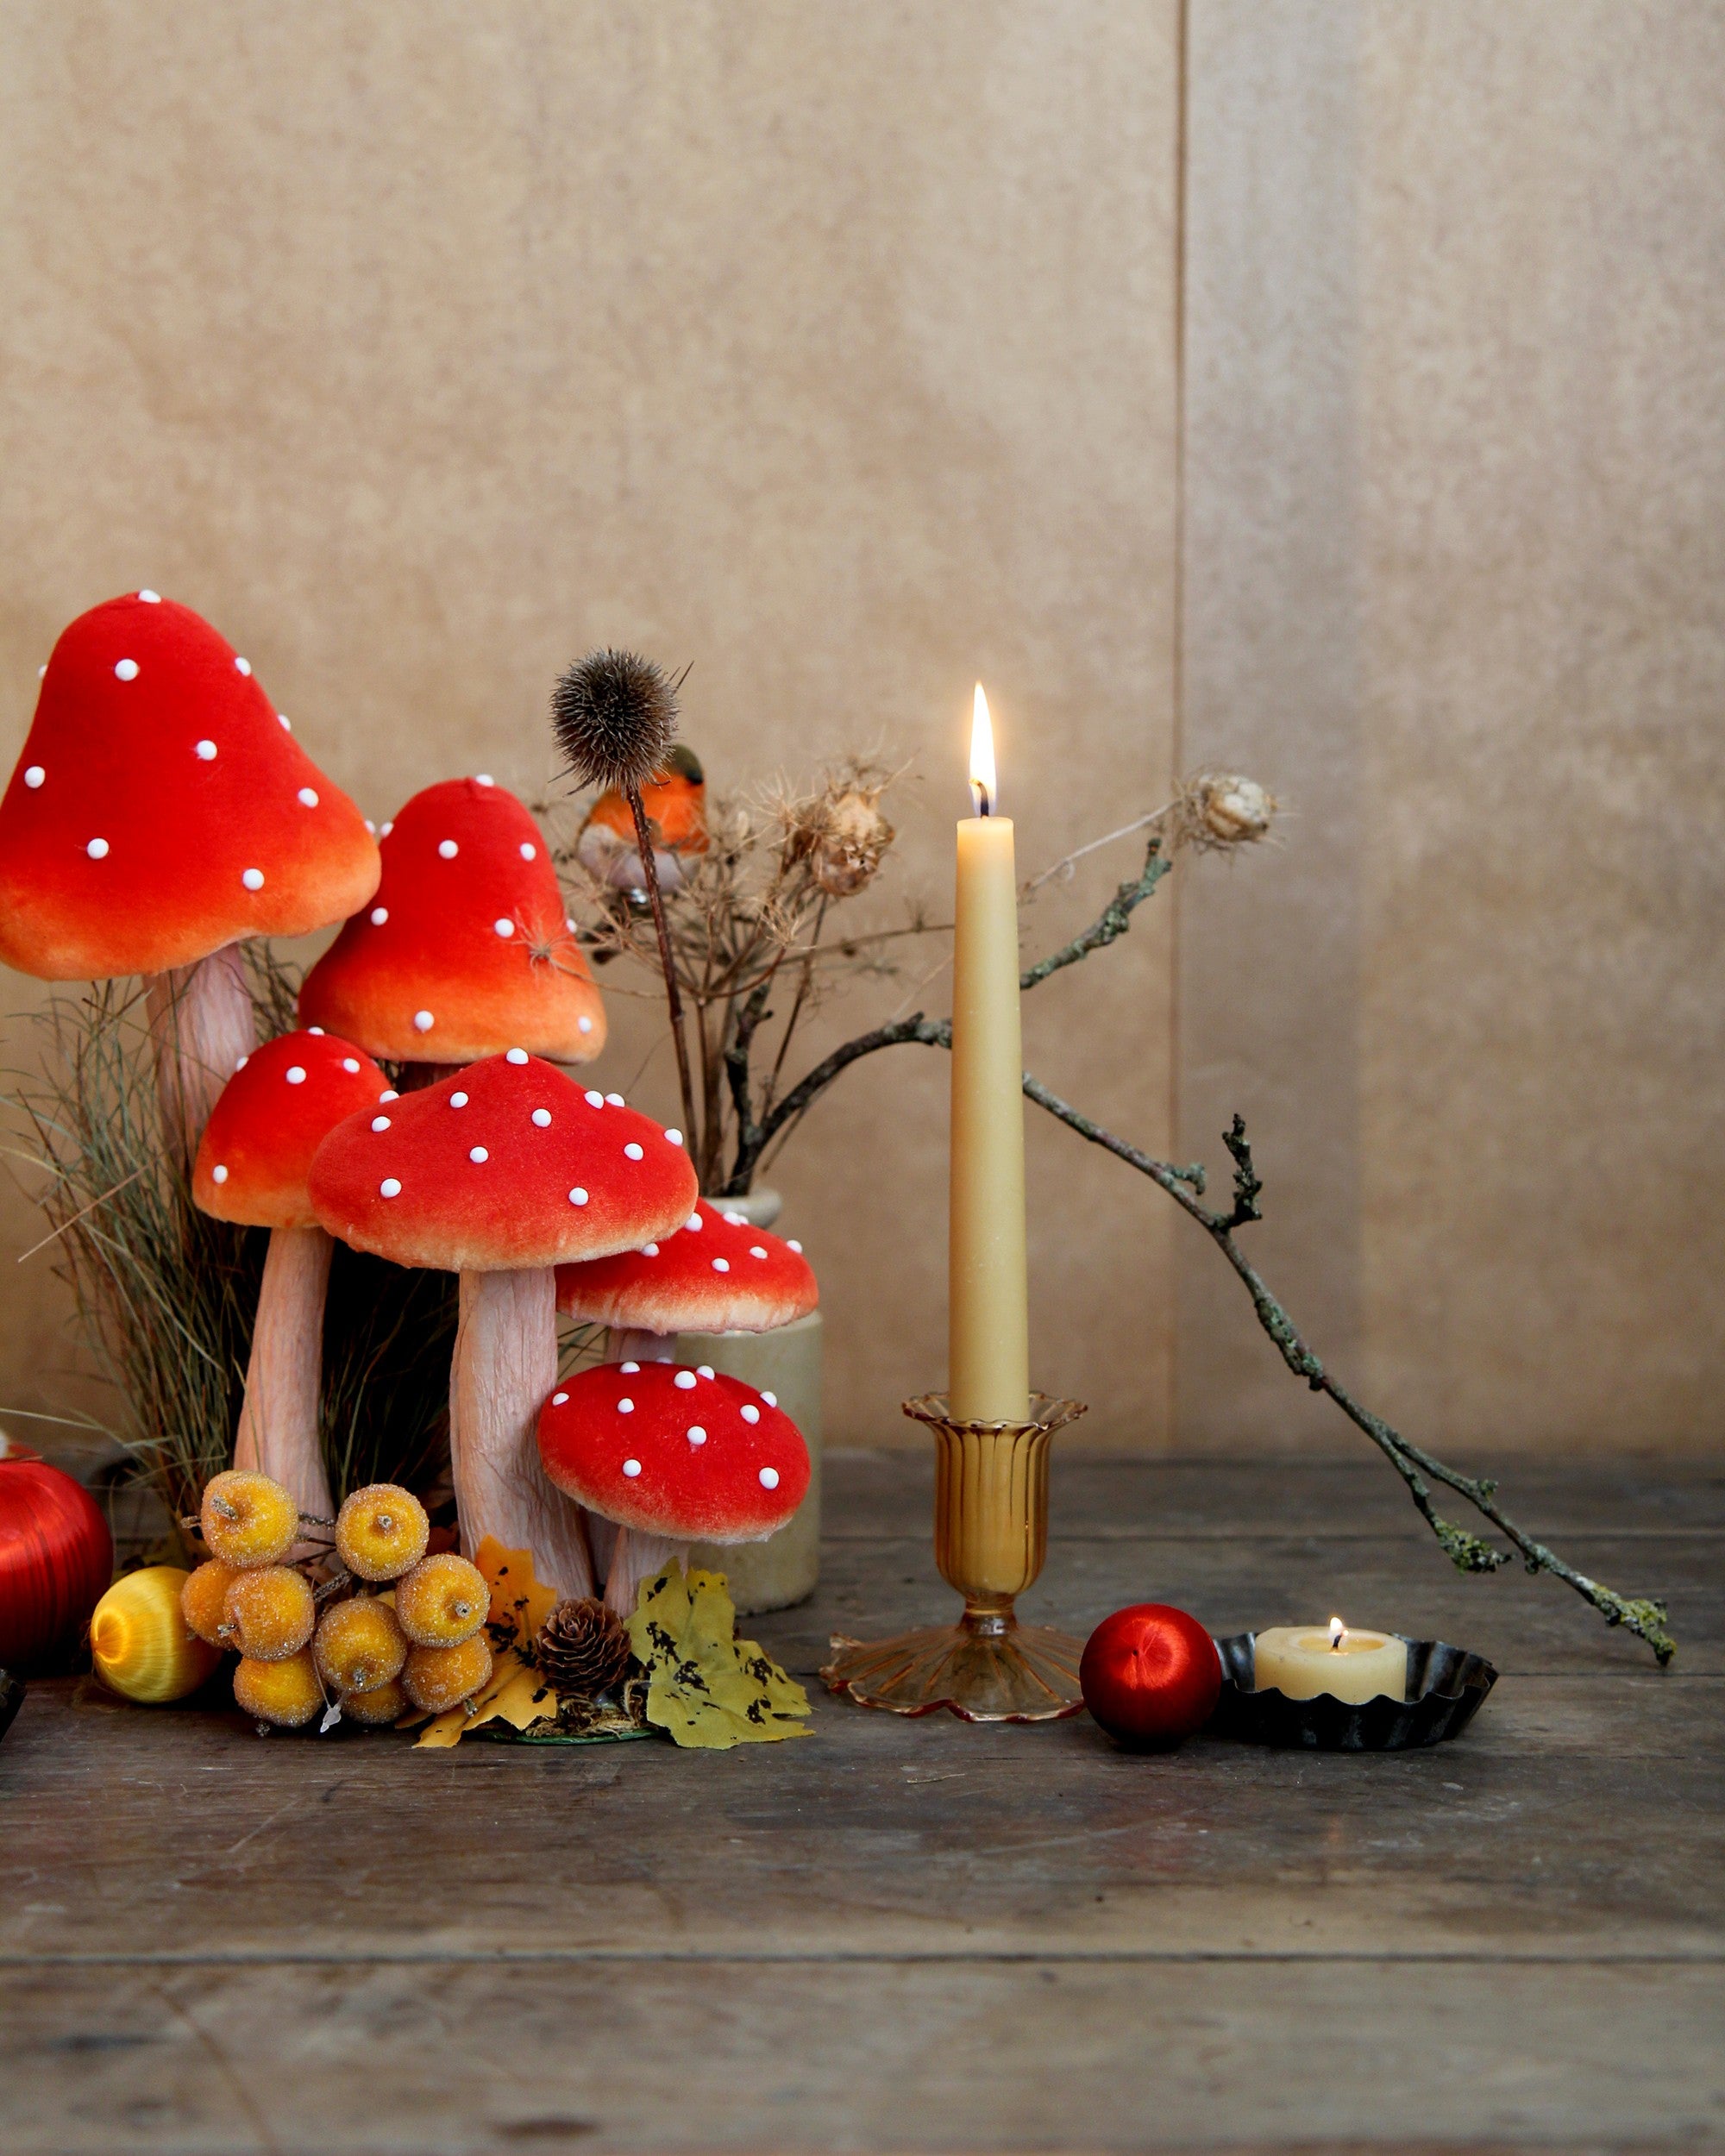 whimsical woodland tablescape with toadstools, beeswax candles and festive decorations